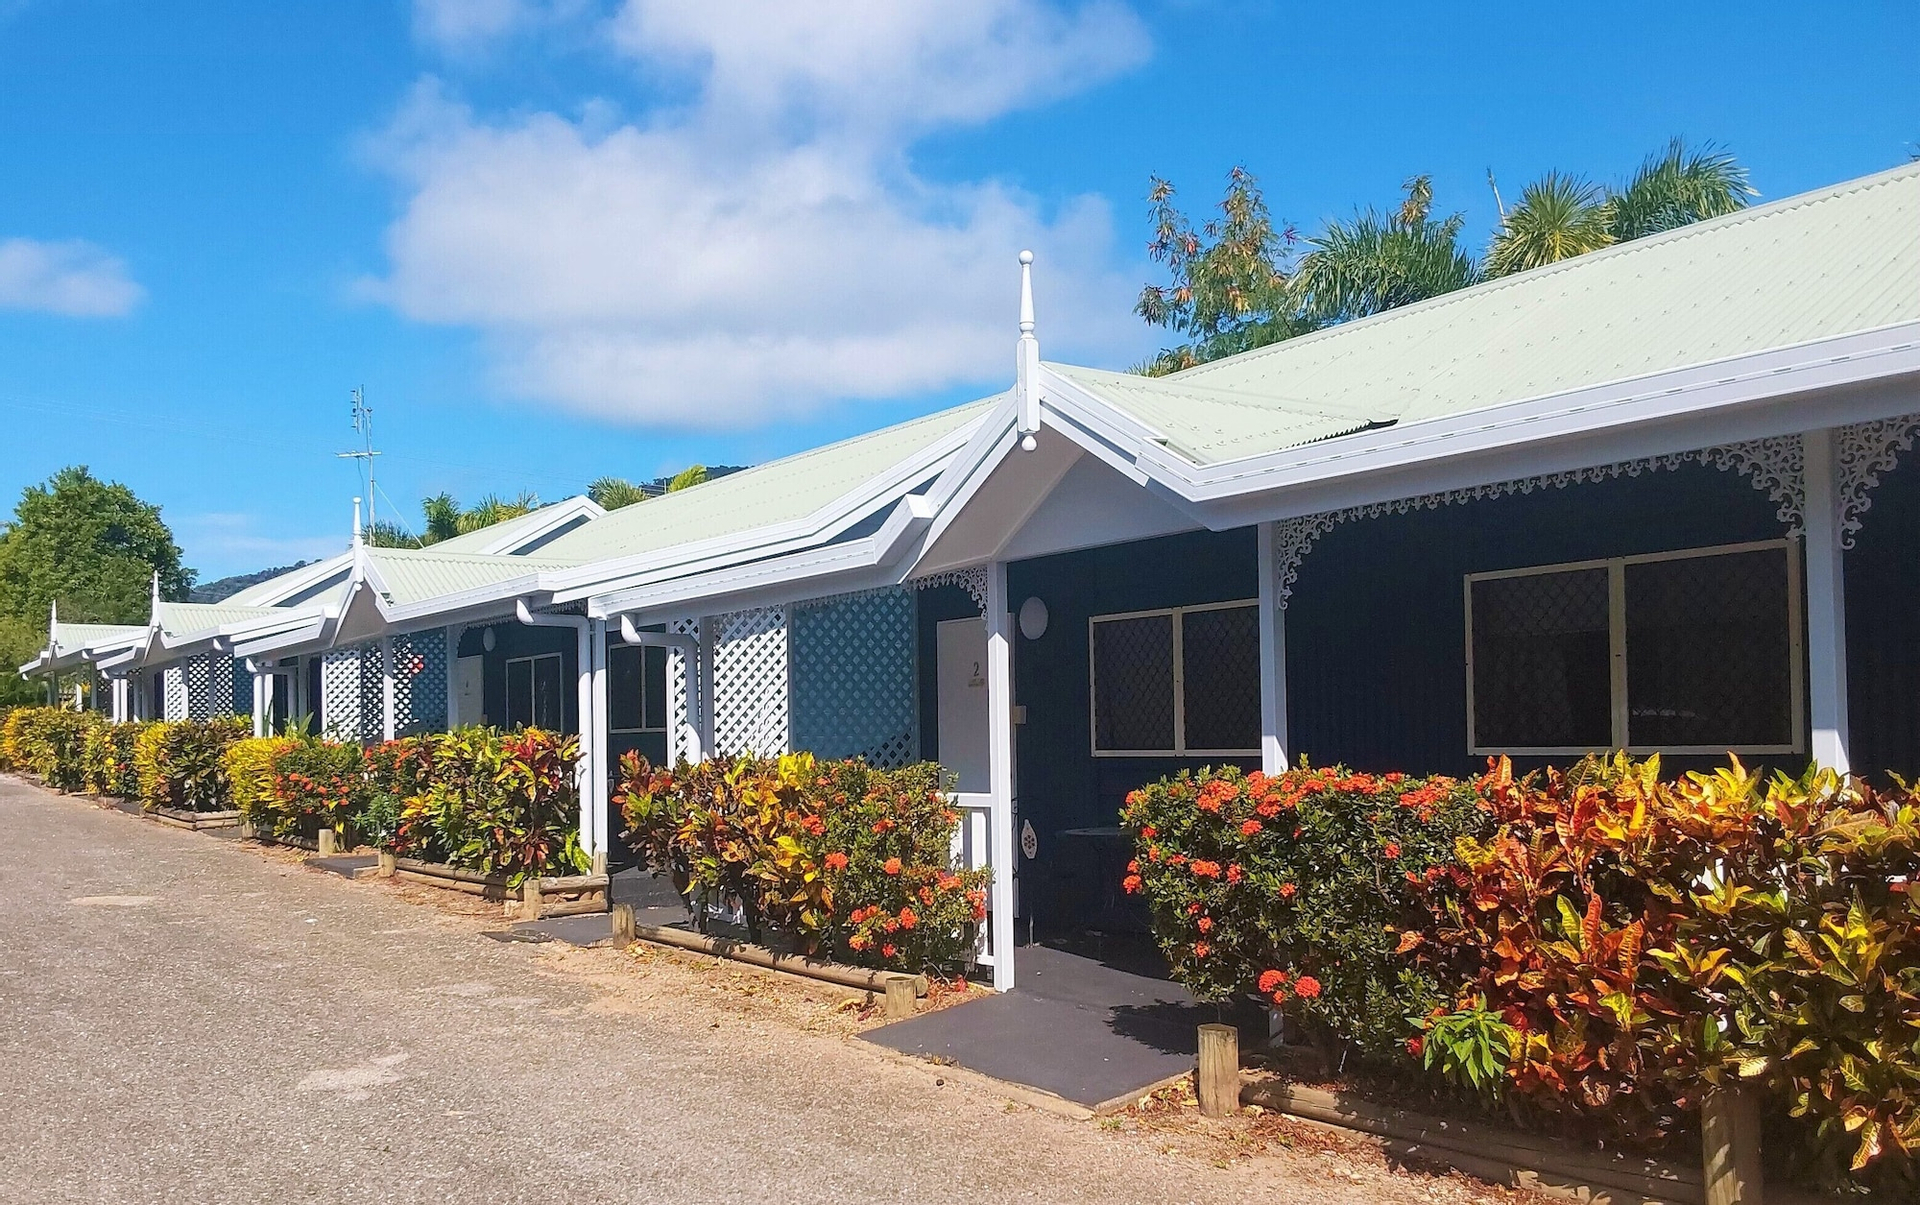 Primary image, Cooktown Motel, Cook